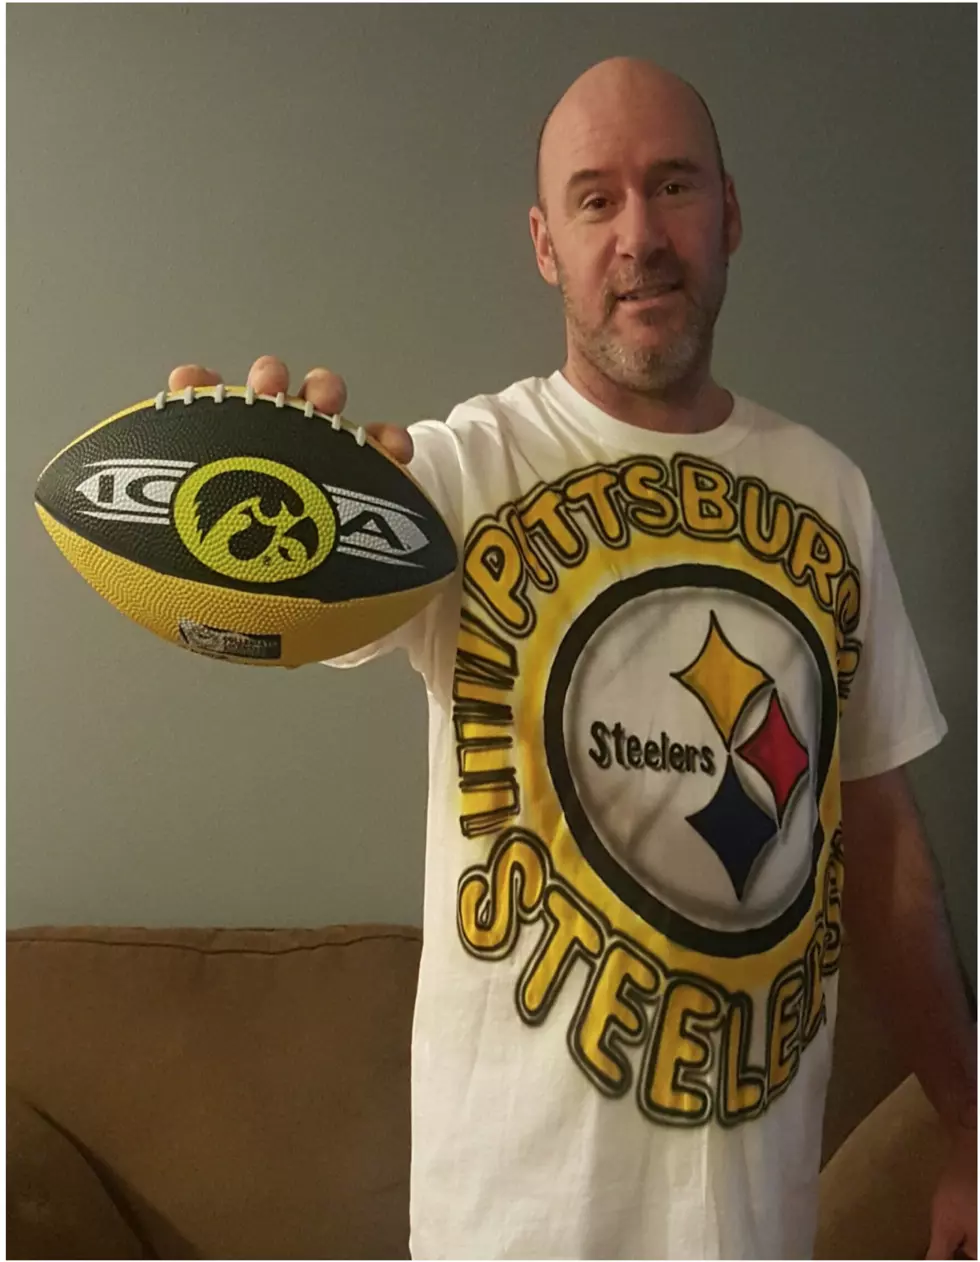 Congratulations to Rick Chesmore, our Overall Pigskin Pick ‘Em Winner!